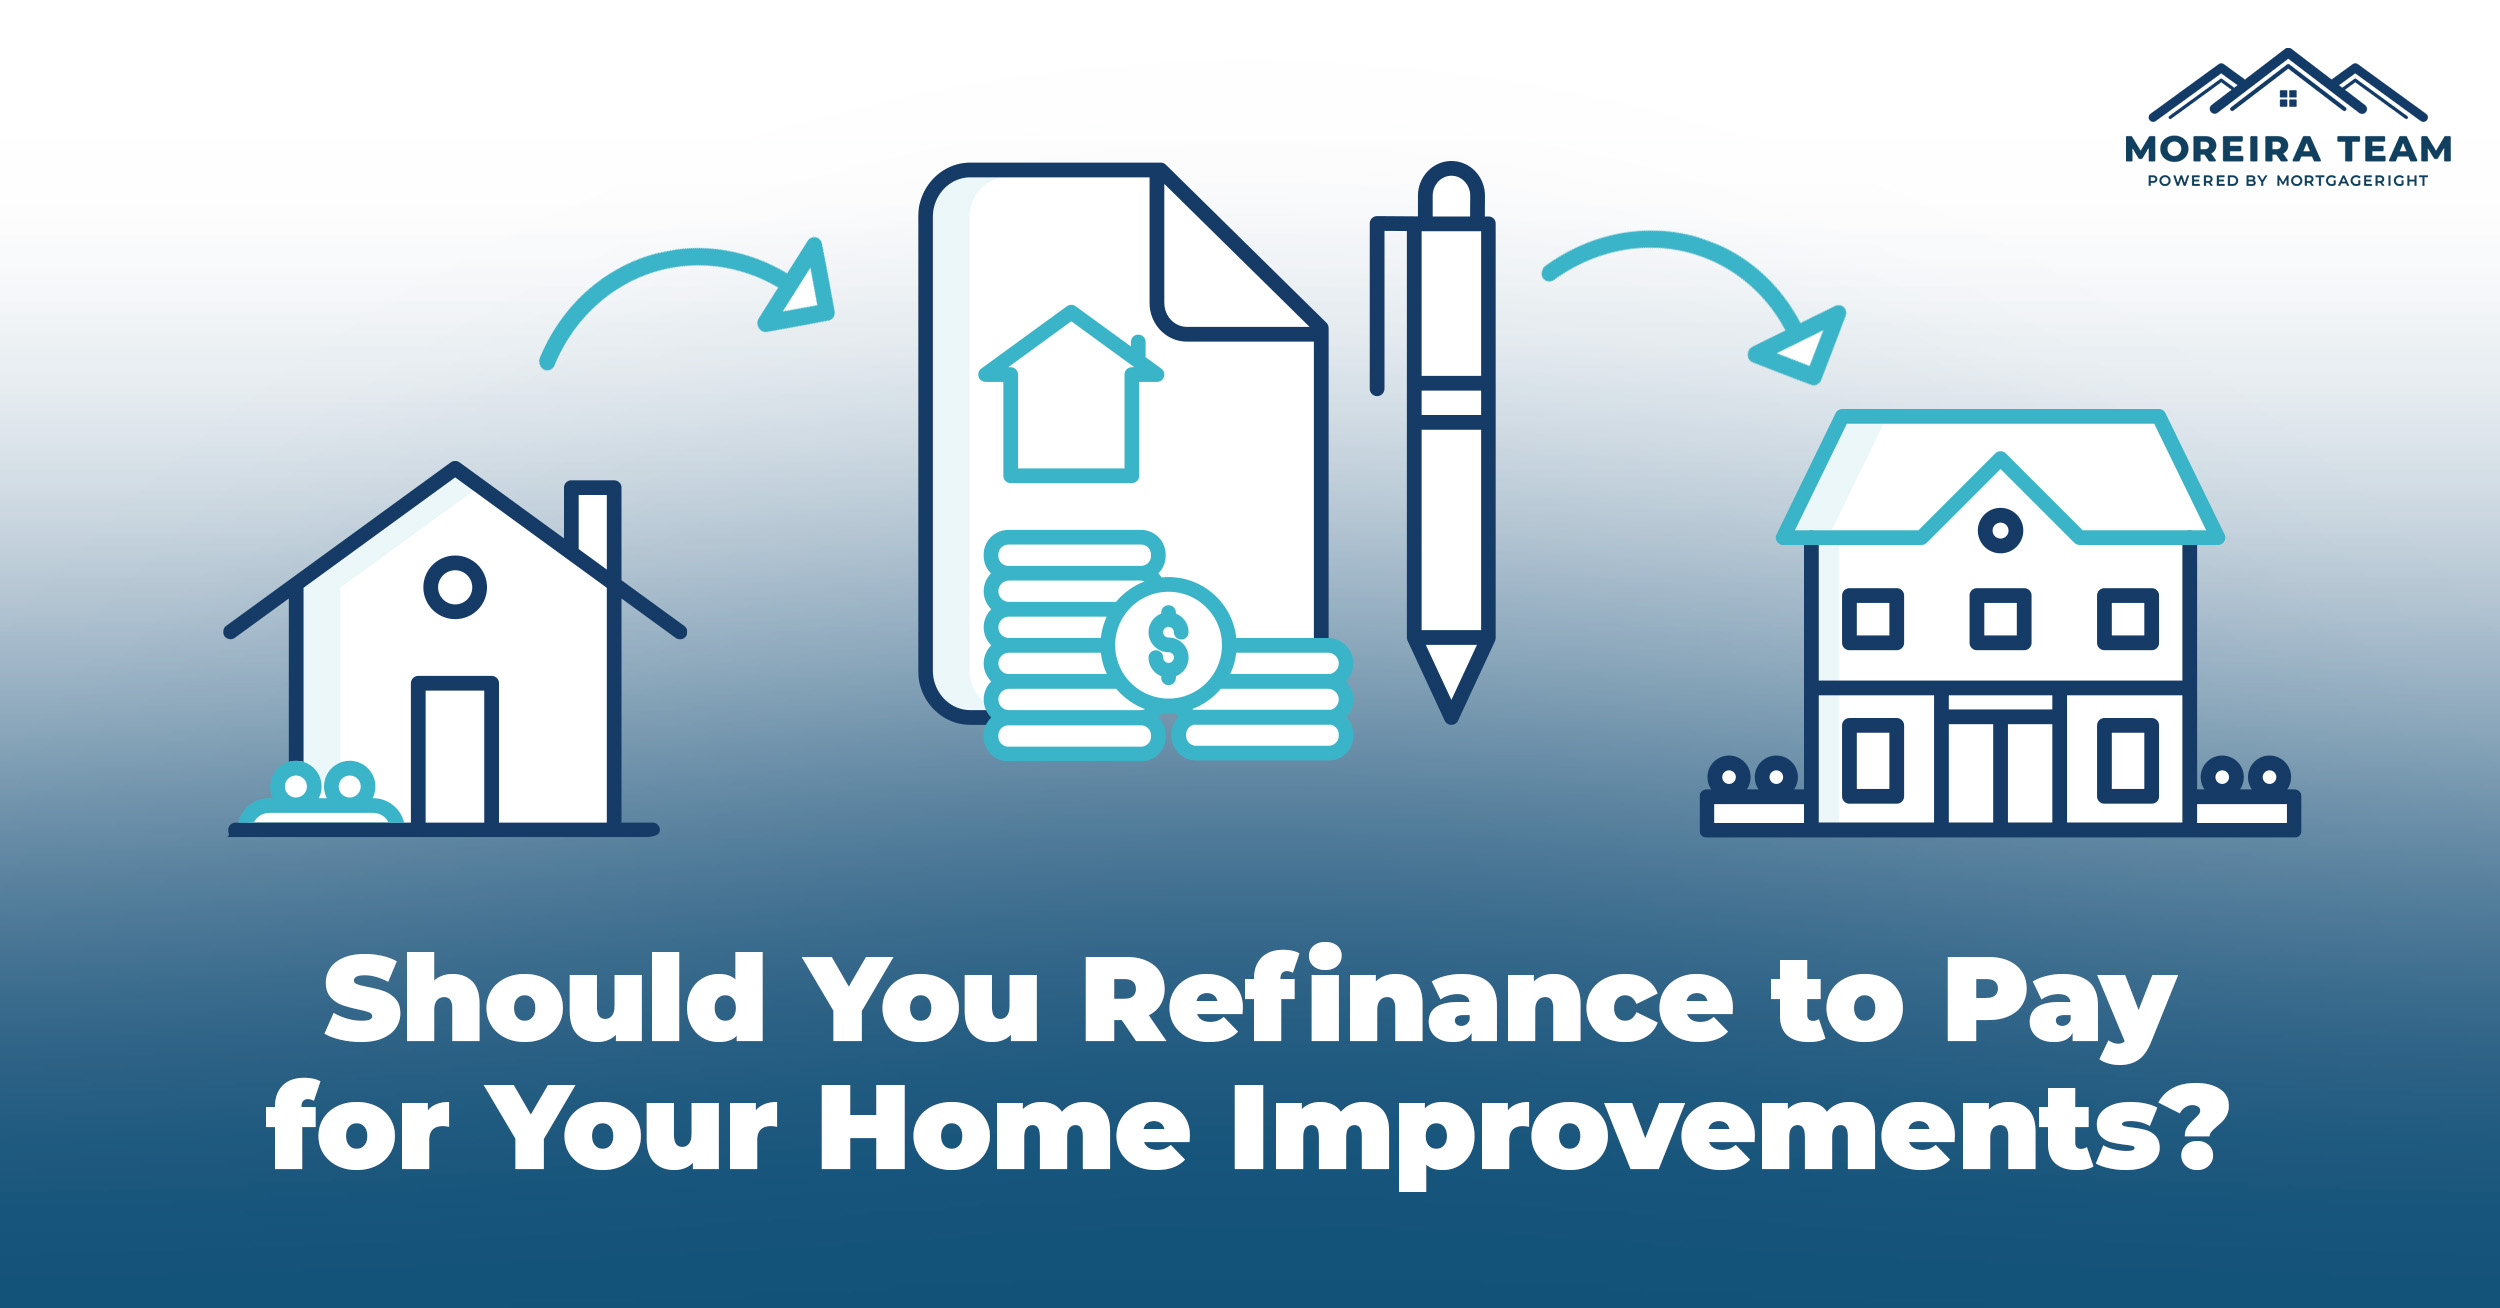 Should You Refinance To Pay For Your Home Improvements?